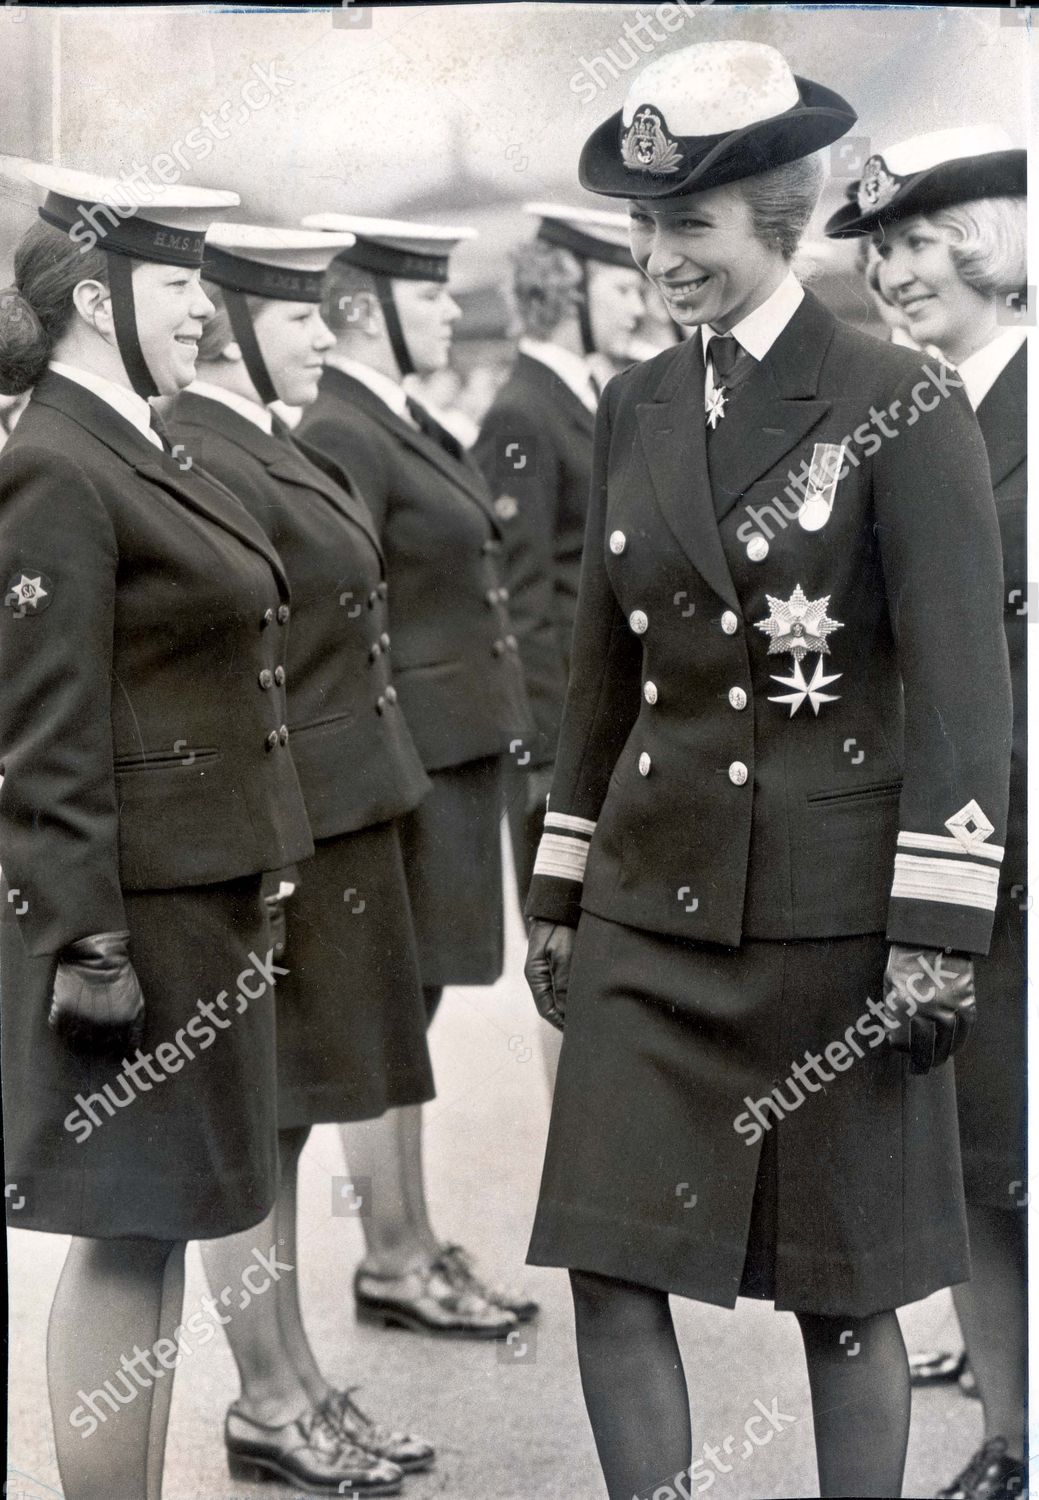 princess-anne-now-princess-royal-uniforms-picture-shows-princess-anne-wearing-the-wrns-uniform-for-the-first-time-the-princess-appointed-chief-commandant-of-the-womens-royal-naval-service-in-july-took-the-salute-during-a-passing-out-parade-at-shutterstock-editorial-891150a.jpg